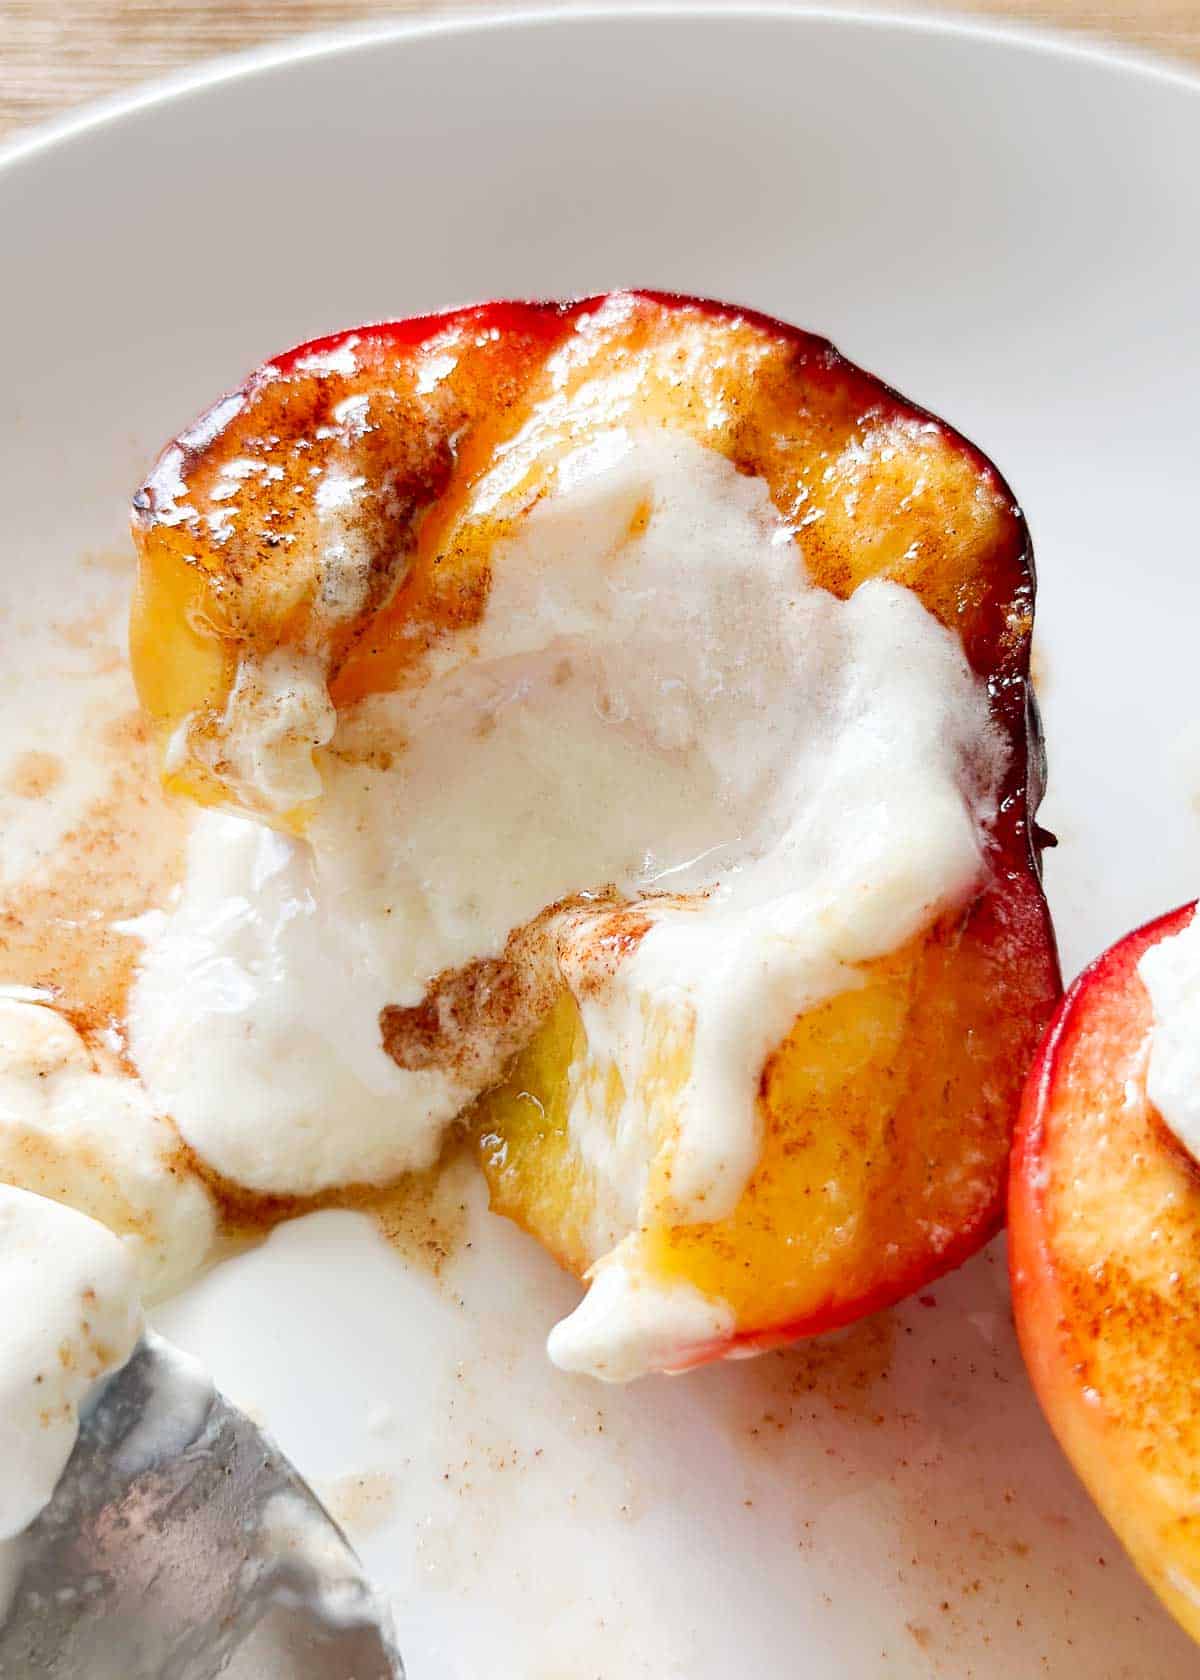 Grilled peaches with cream on top.